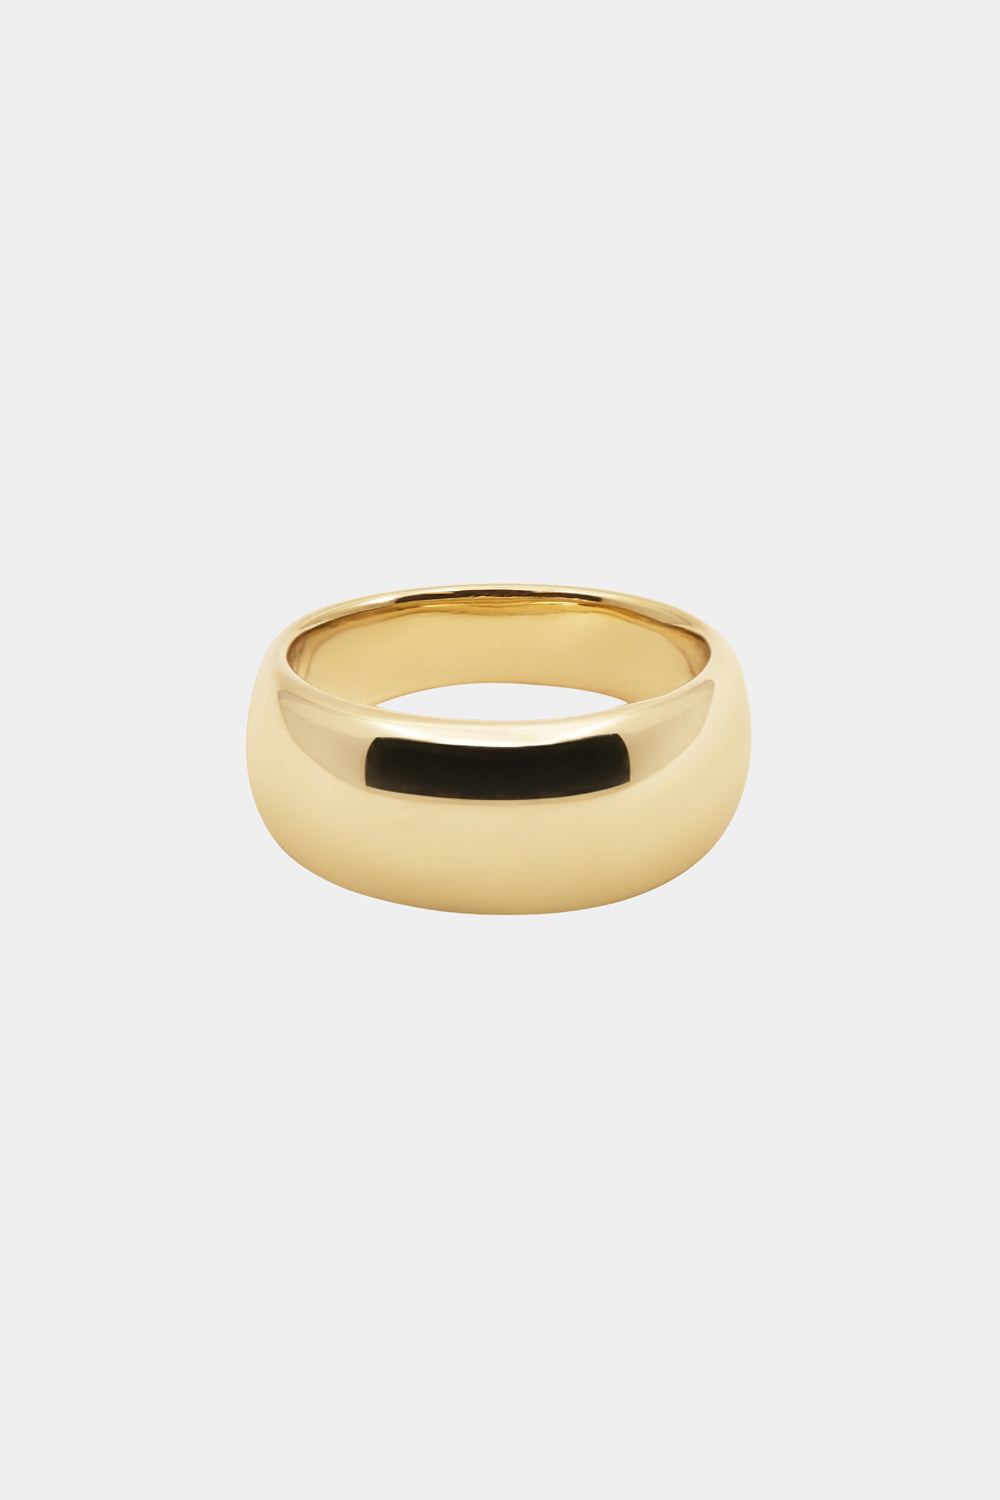 Blob Ring | Yellow Gold, More options available